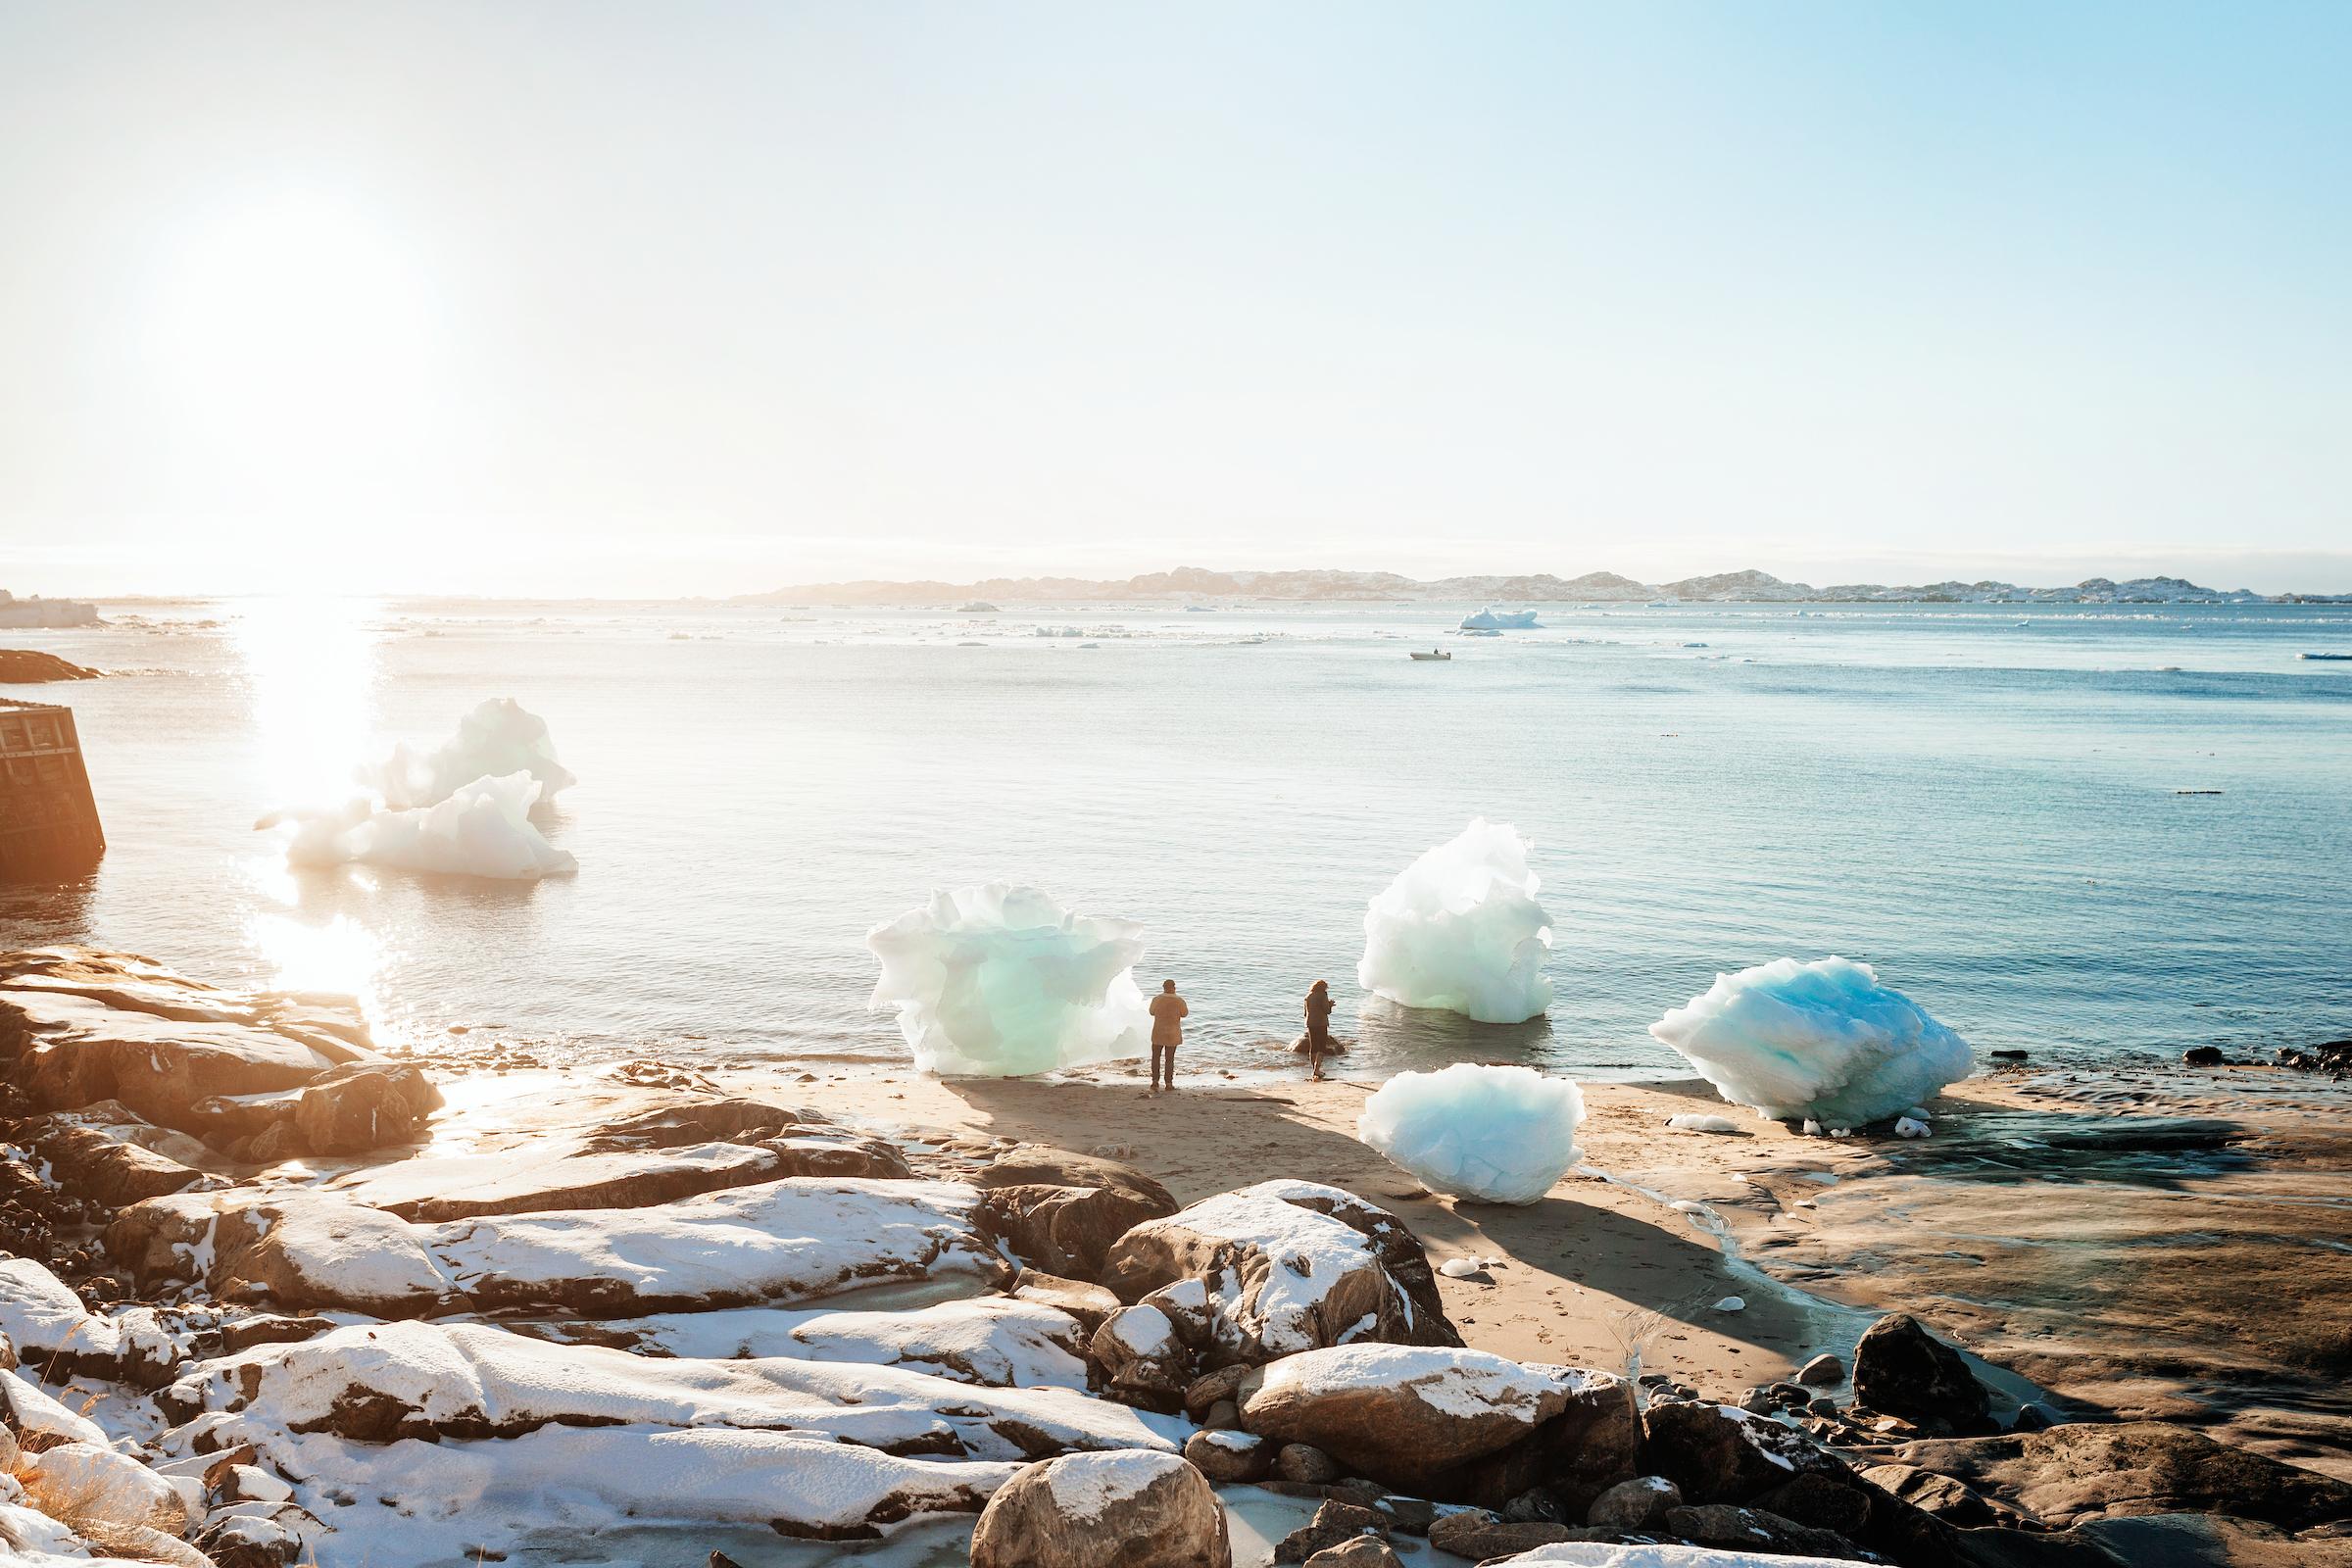 Two tourists on the beach in the colonial harbour of Nuuk in Greenland taking photos of washed up iceblocks in the sunset. Photo by Rebecca Gustafsson